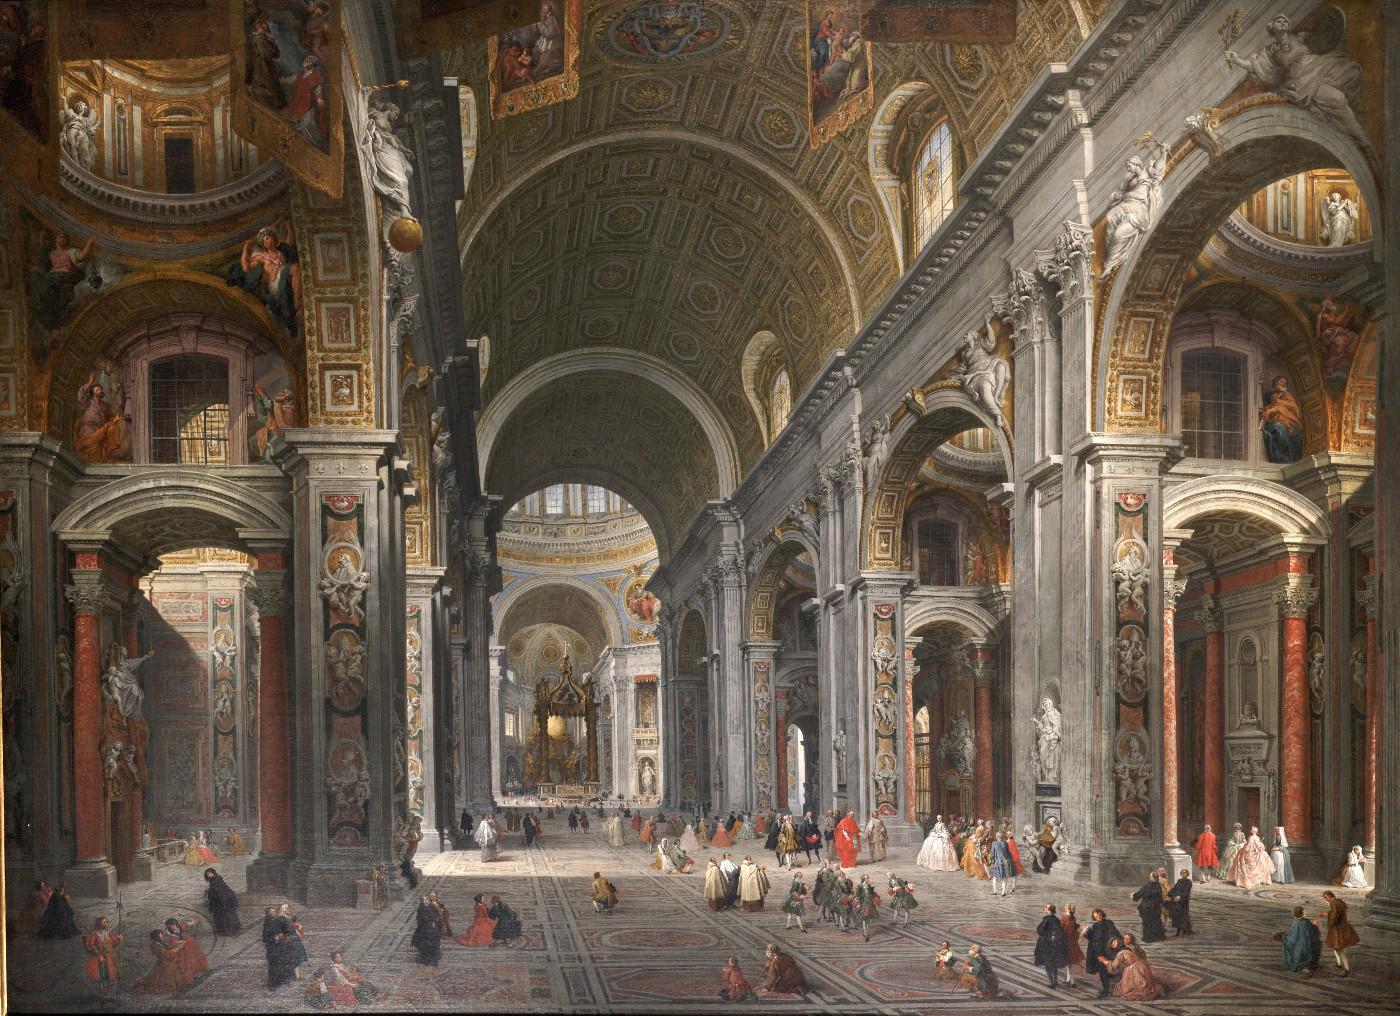 The Interior of St. Peter's during the Visit of the Duc de Choiseul, 1756–57. Giovanni Paolo Panini